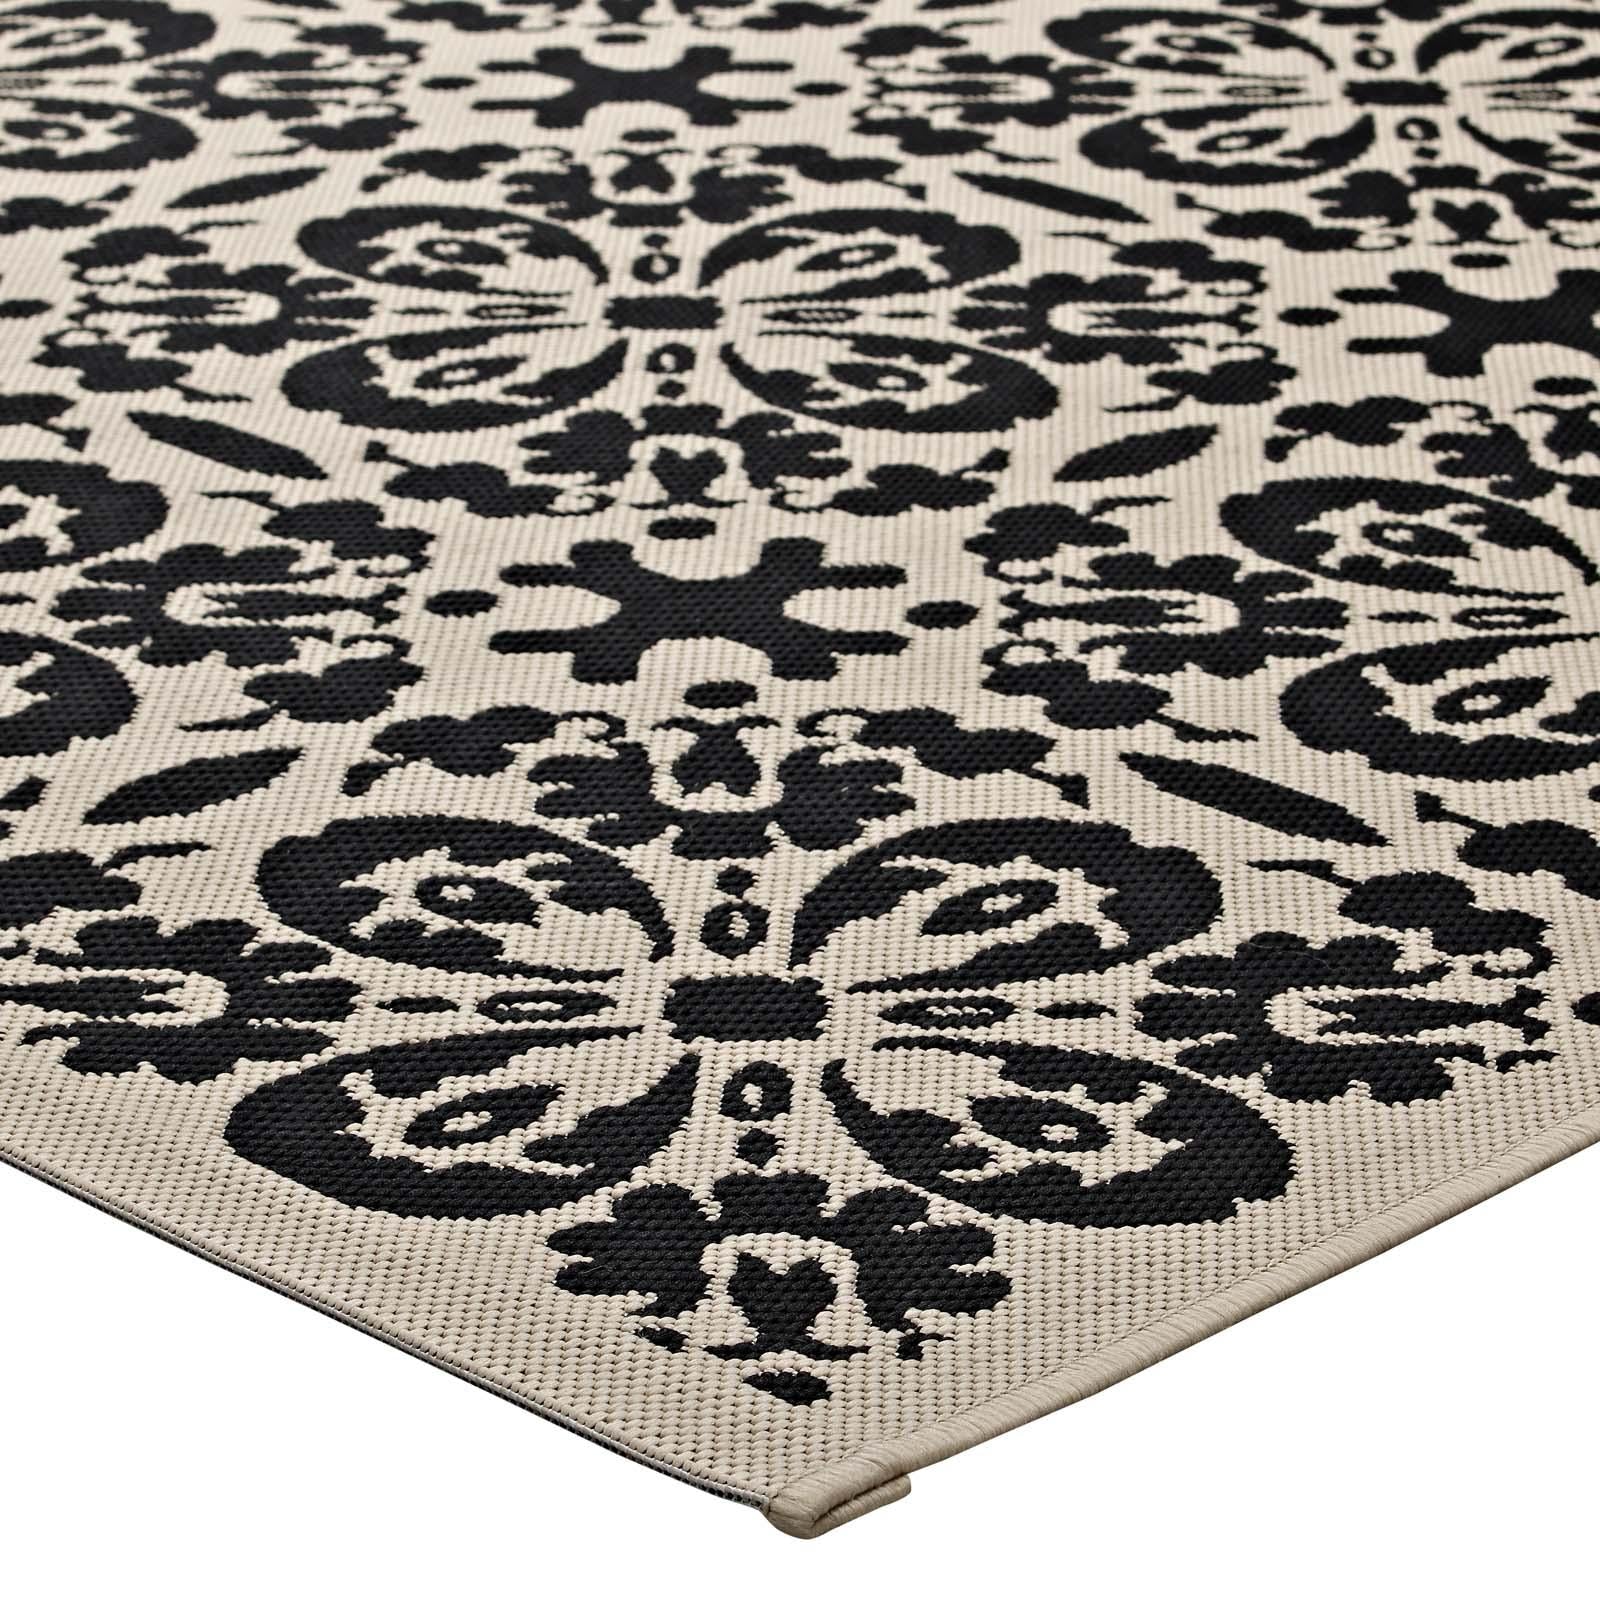 Modway Furniture Modern Ariana Vintage Floral Trellis 9x12 Indoor and Outdoor Area Rug - R-1142-912